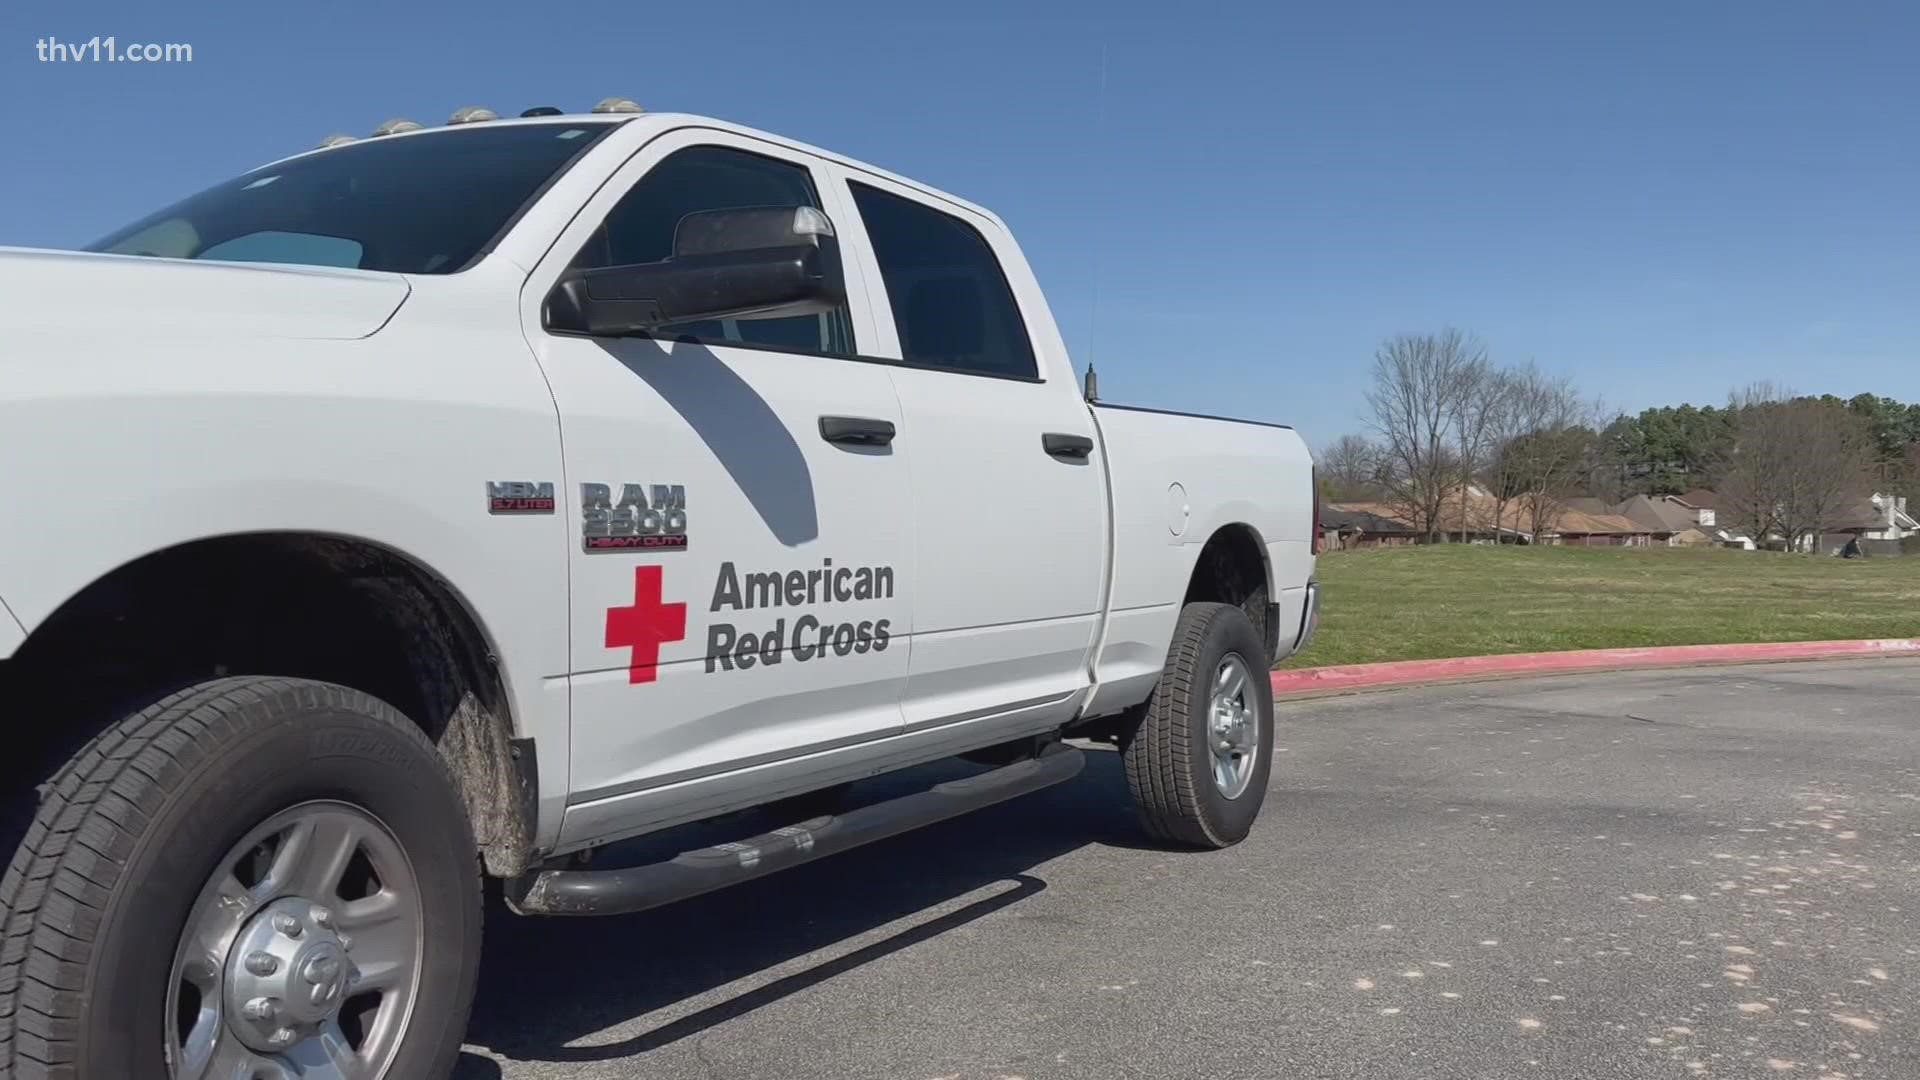 American Red Cross volunteers from across the Missouri and Arkansas regions have stepped up to provide aid in impacted areas of Puerto Rico.